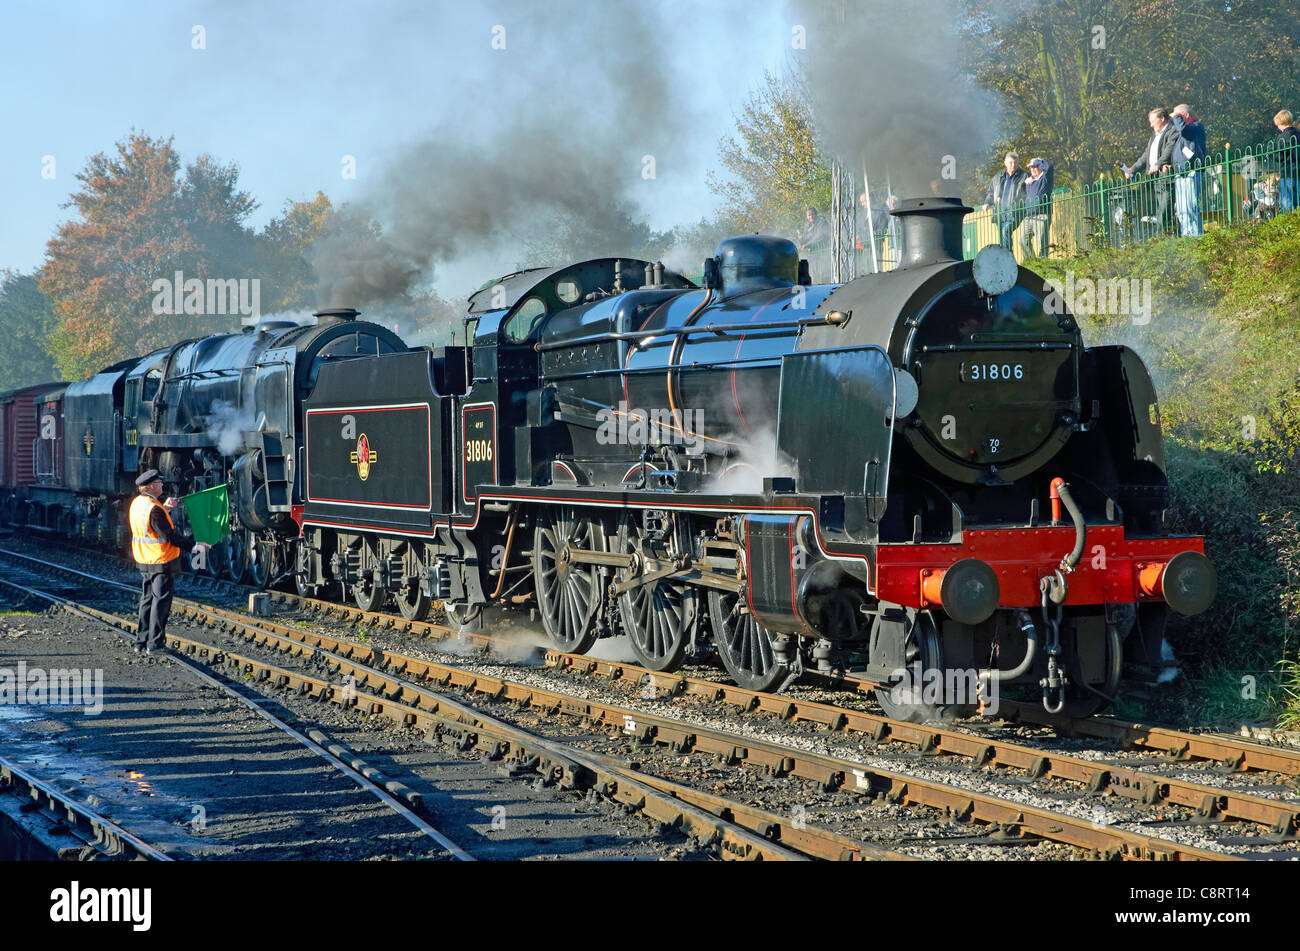 Mid-Hants Railway Autumn Gala 28/10/11. 9F (rear) and U class (front) engines on a demonstration freight train at Ropley. Stock Photo